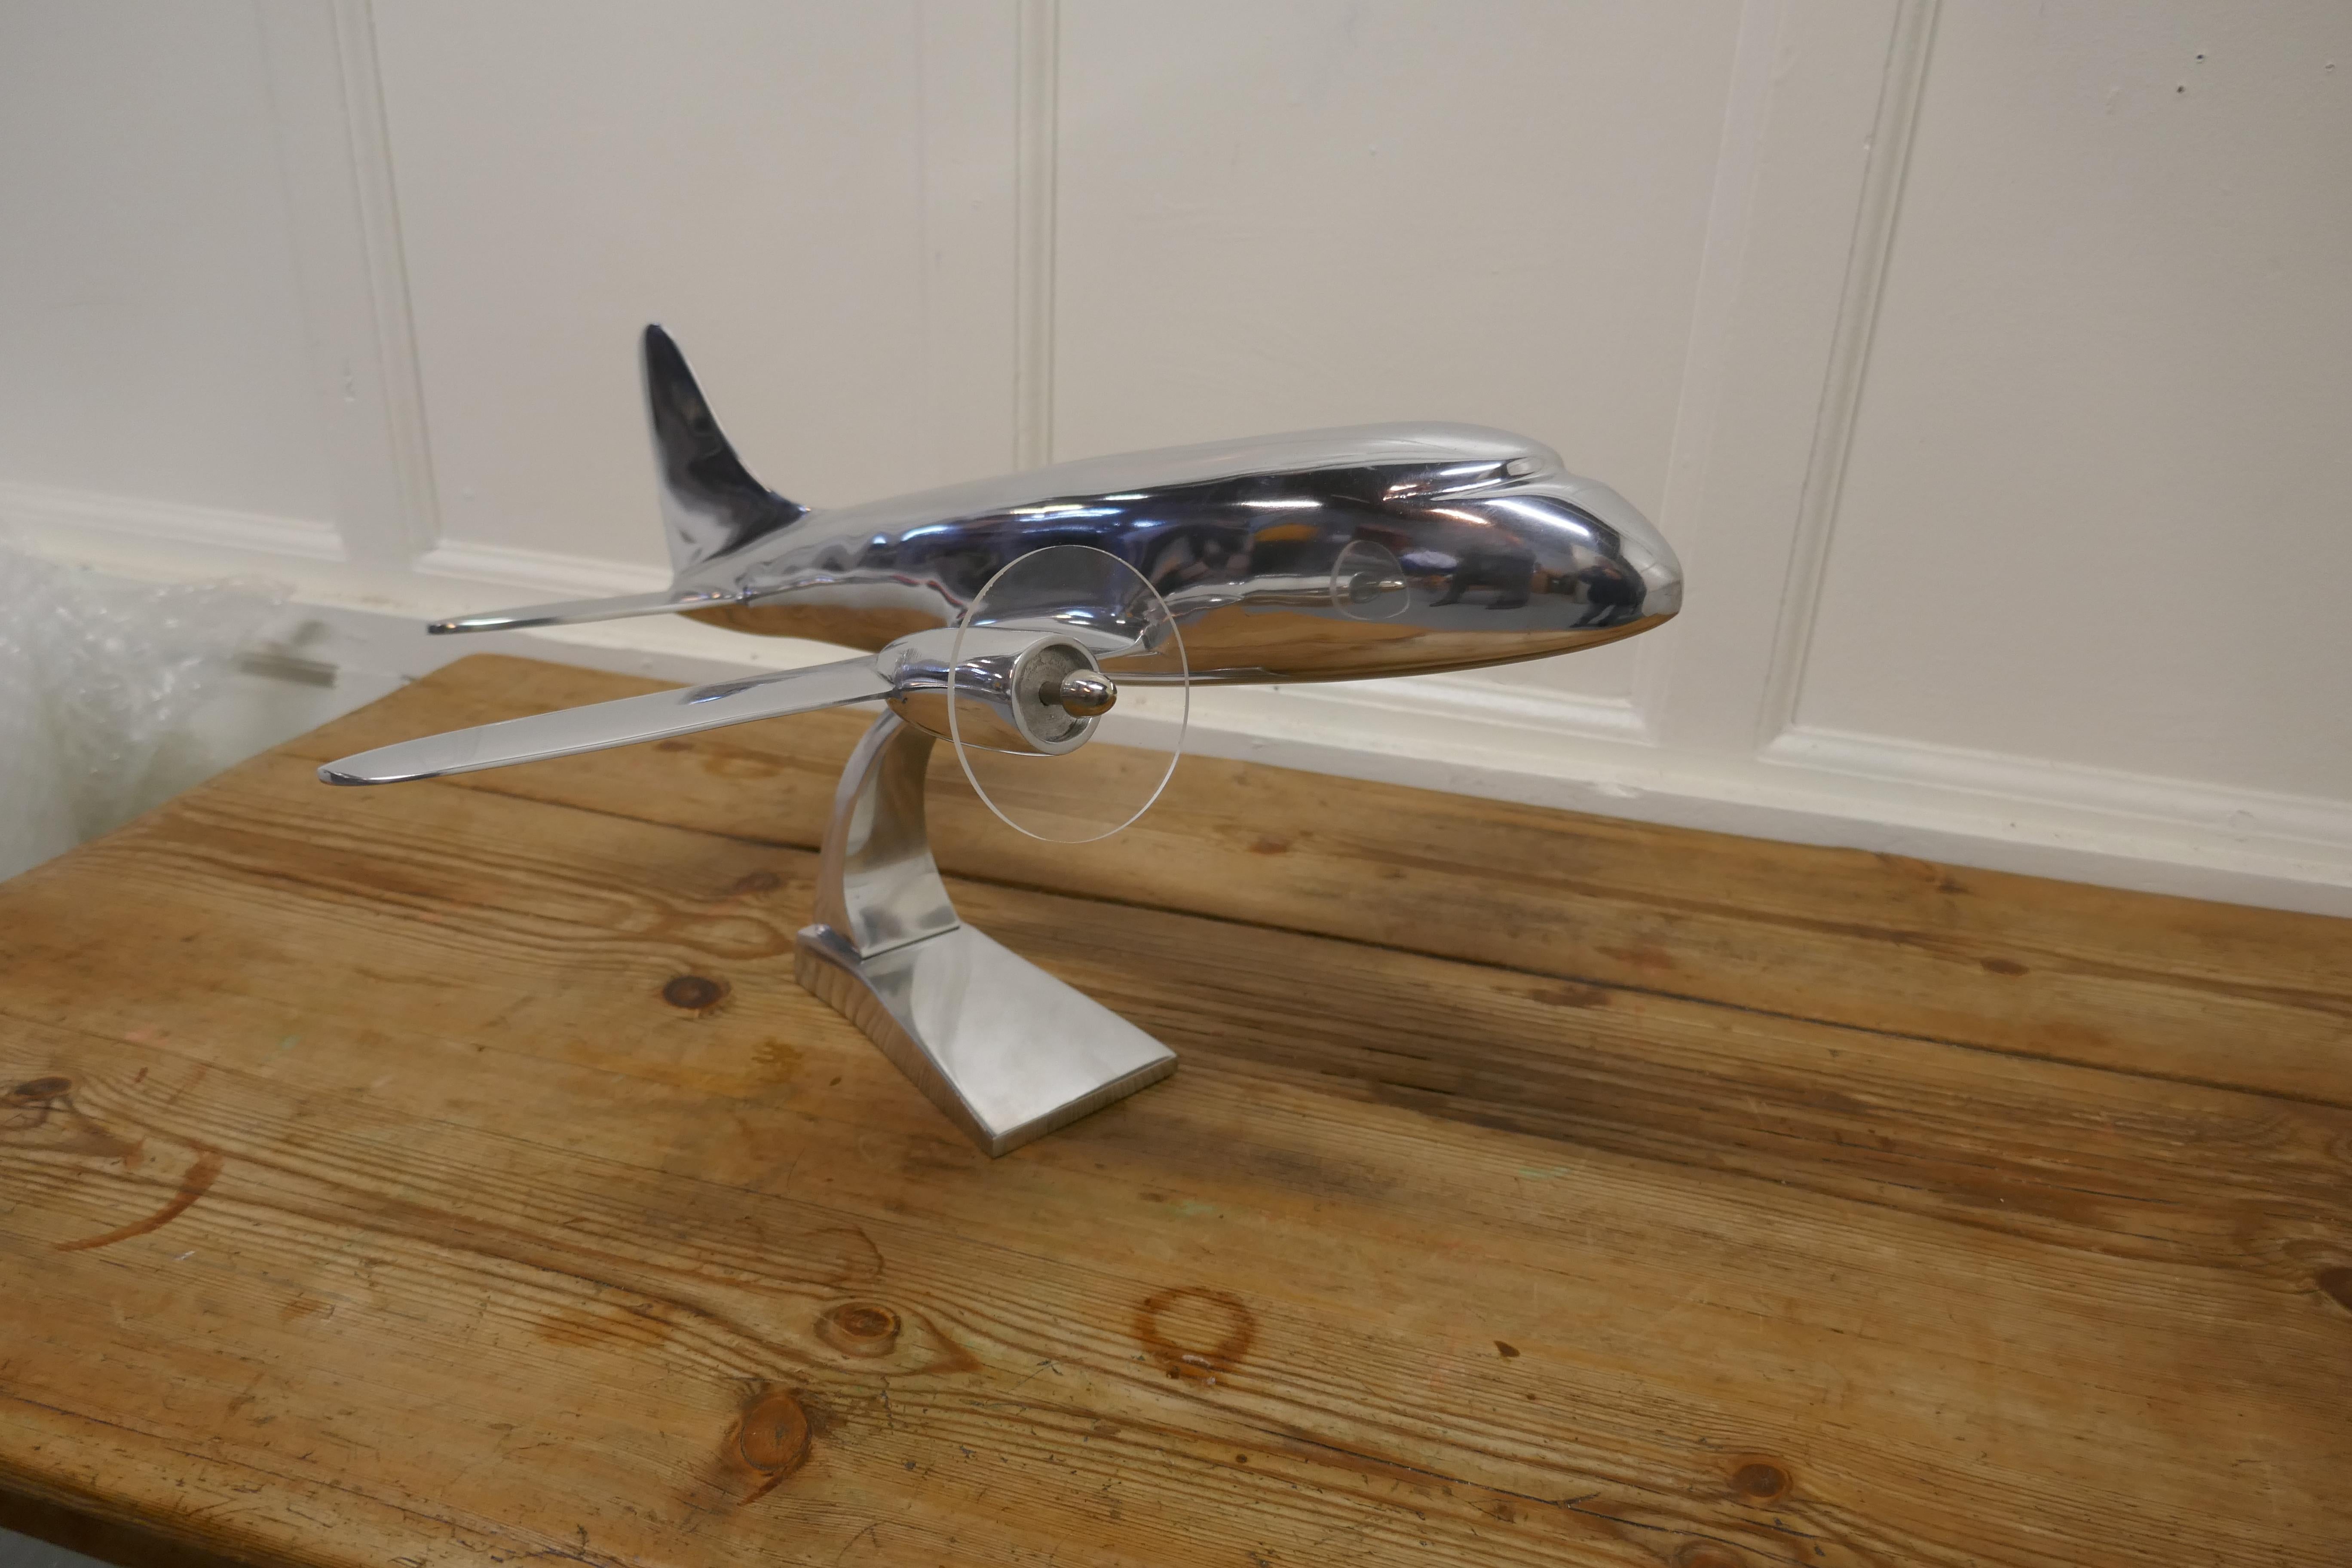 Large French chrome desktop model of Douglas DC3

A super piece and a great desk ornament for the desk that has everything else 
This model was displayed by BA travel agents, it is polished to a highly reflective stream line chrome finish, with